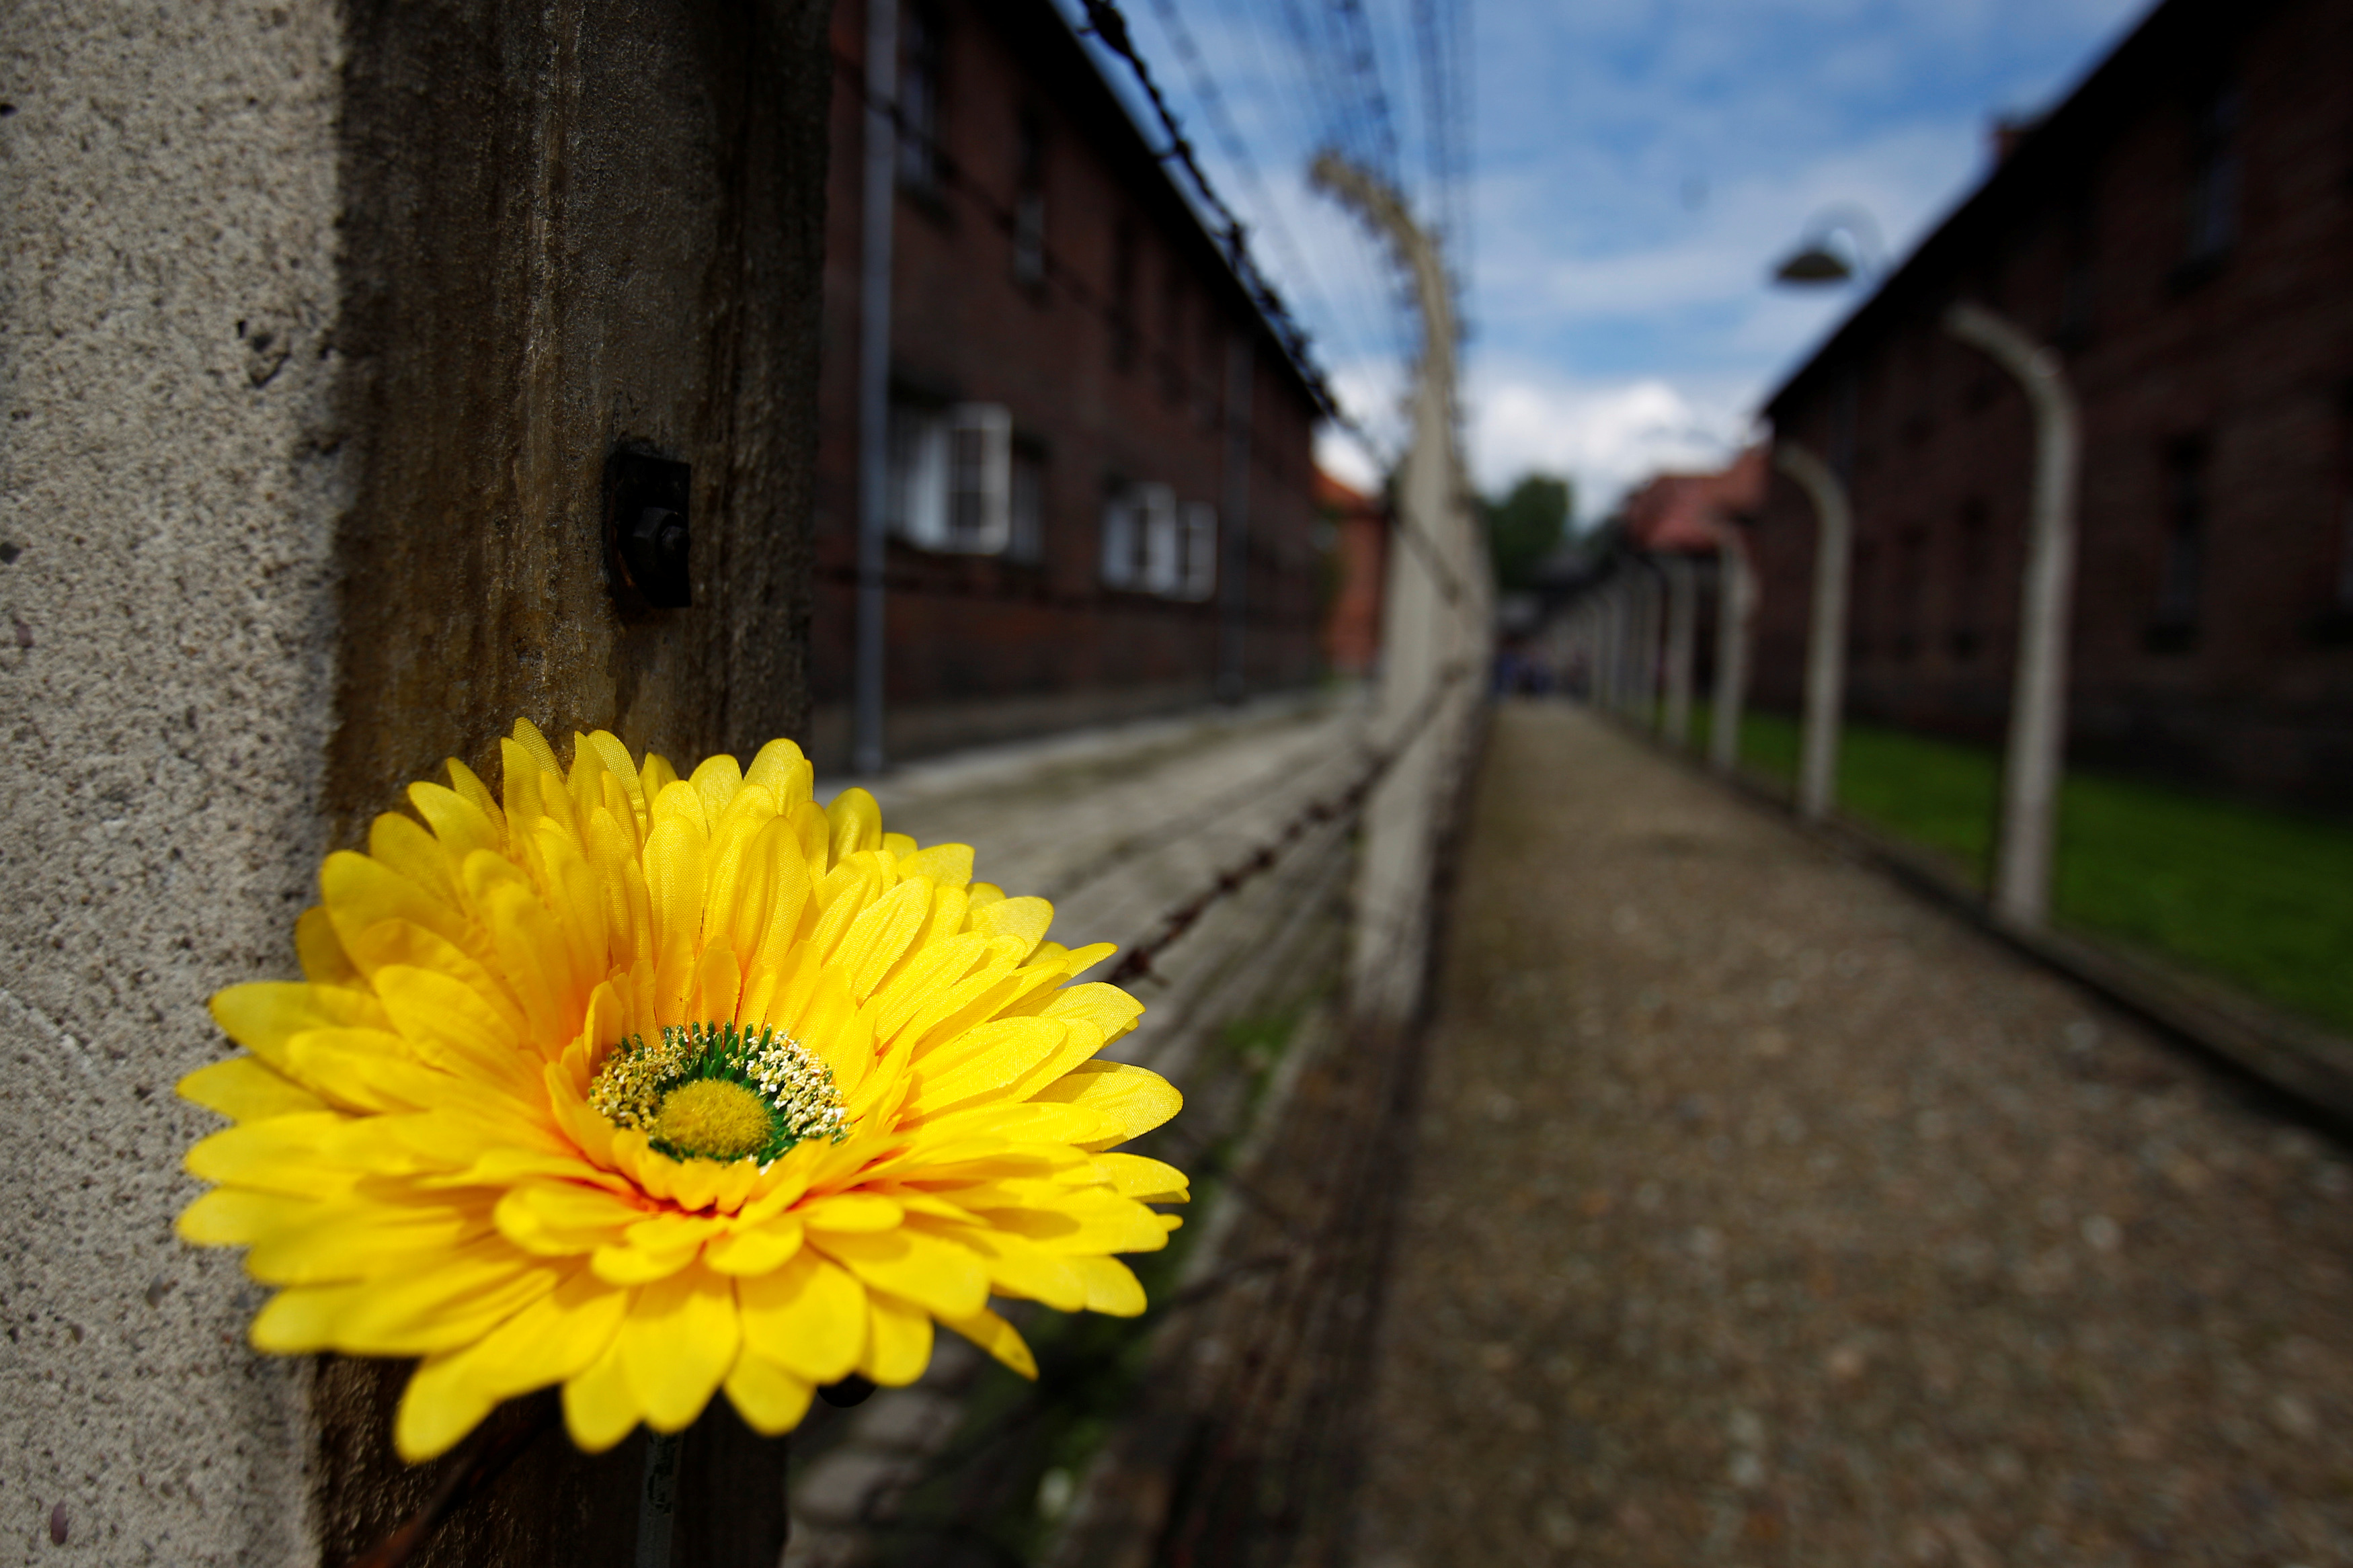 FILE PHOTO: A flower affixed to barbed wire at the Auschwitz-Birkenau state museum in Oswiecim. Poland